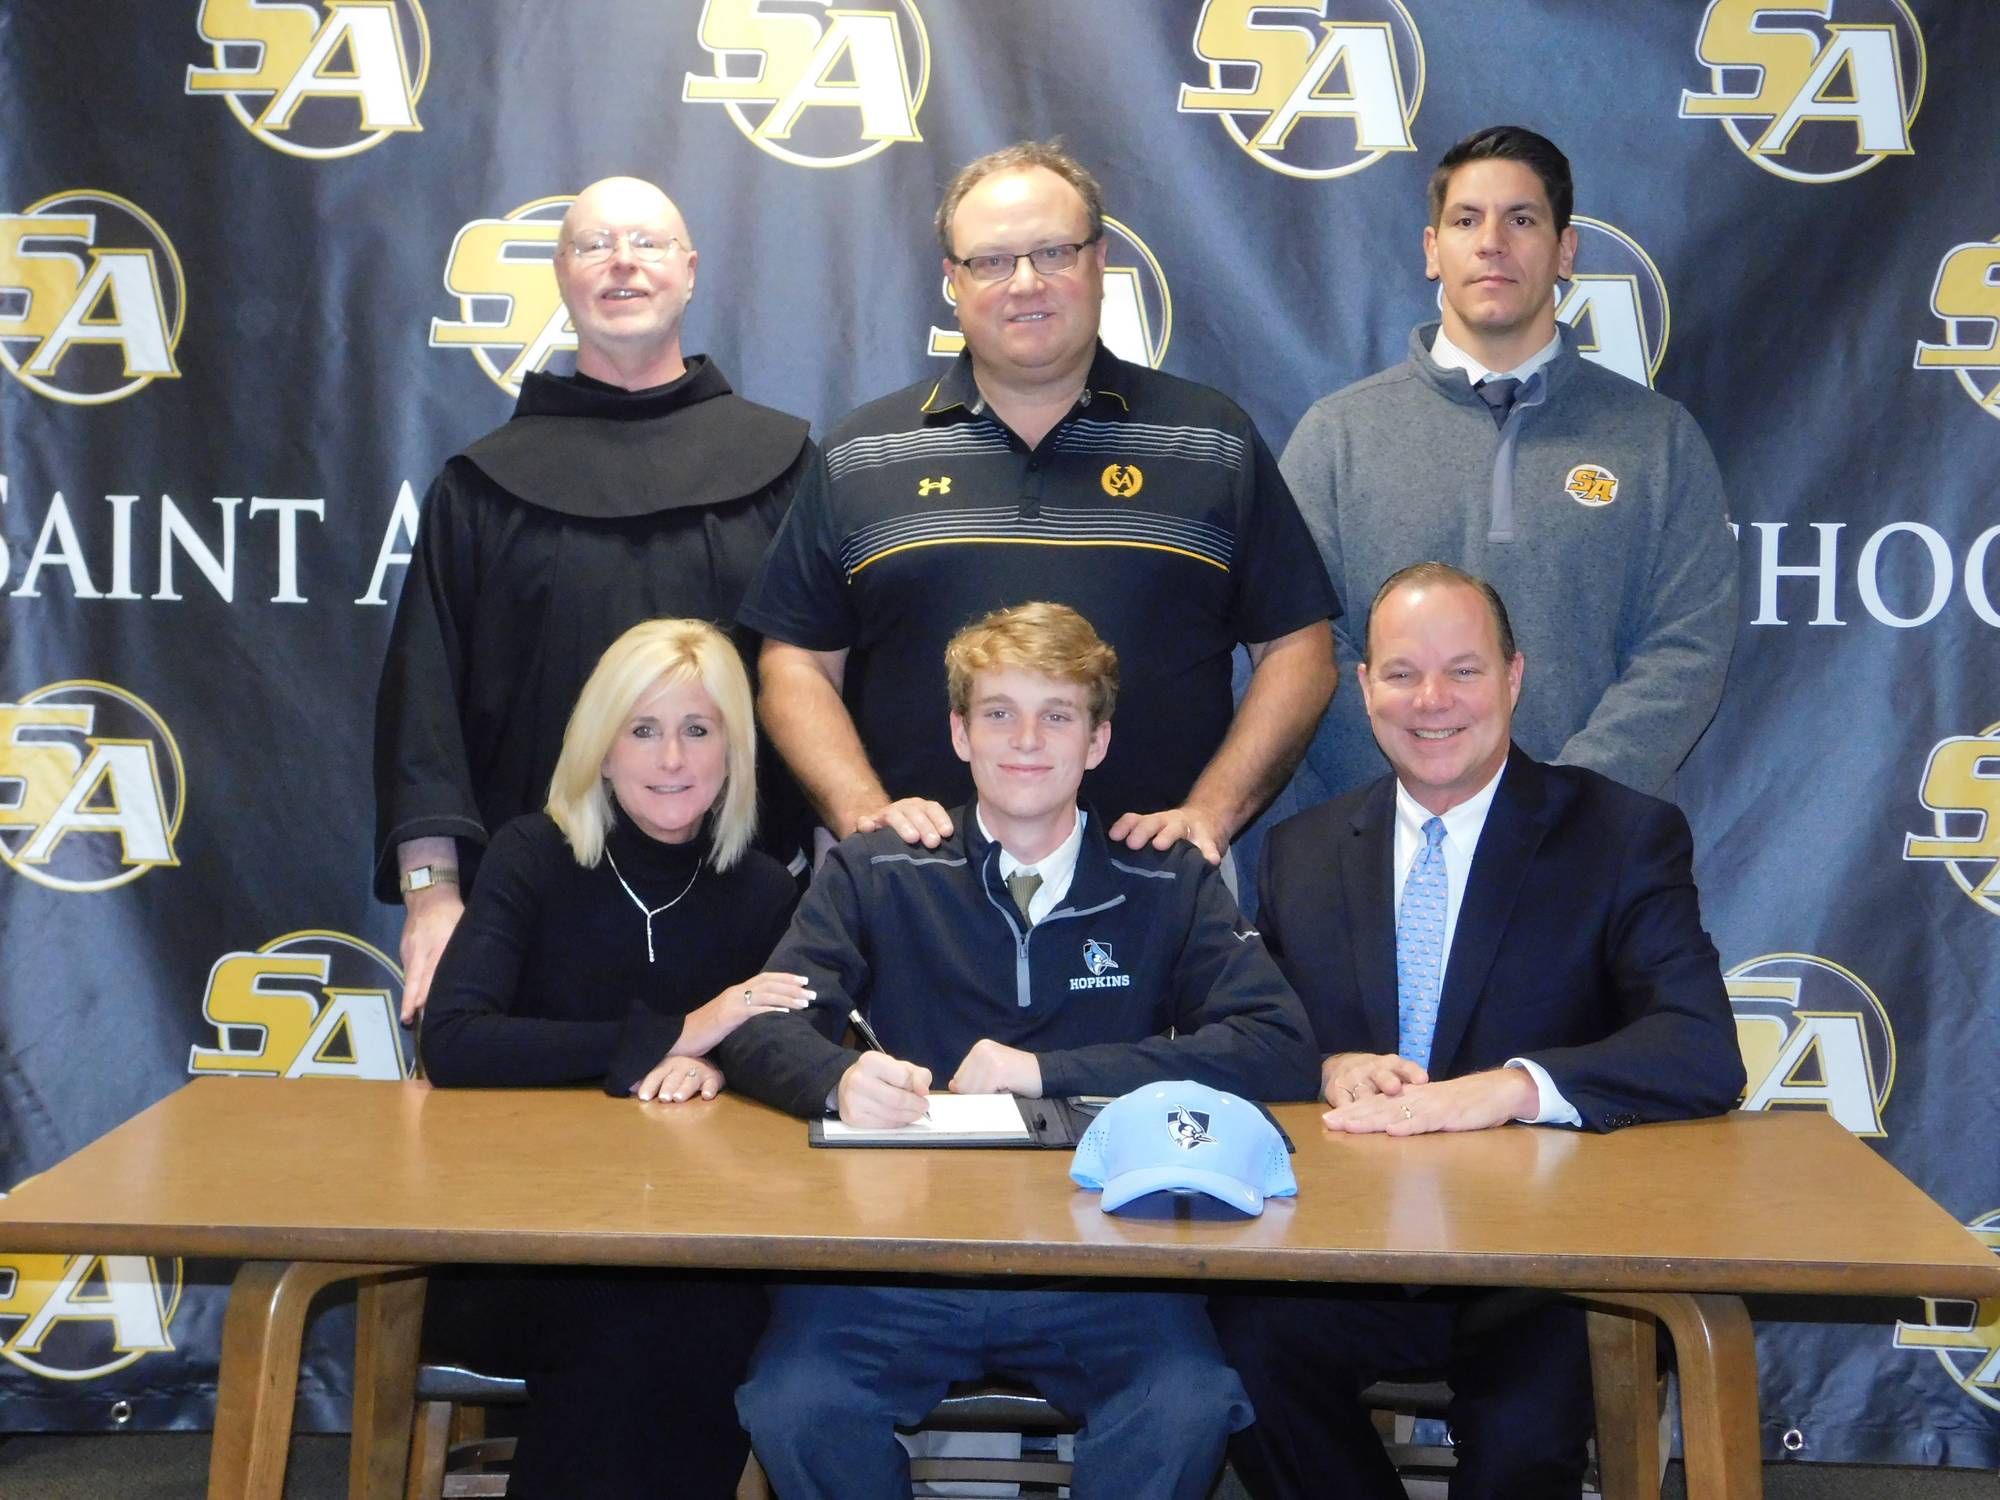 Congratulations Brady Kenneally; committed to Johns Hopkins University to play lacrosse